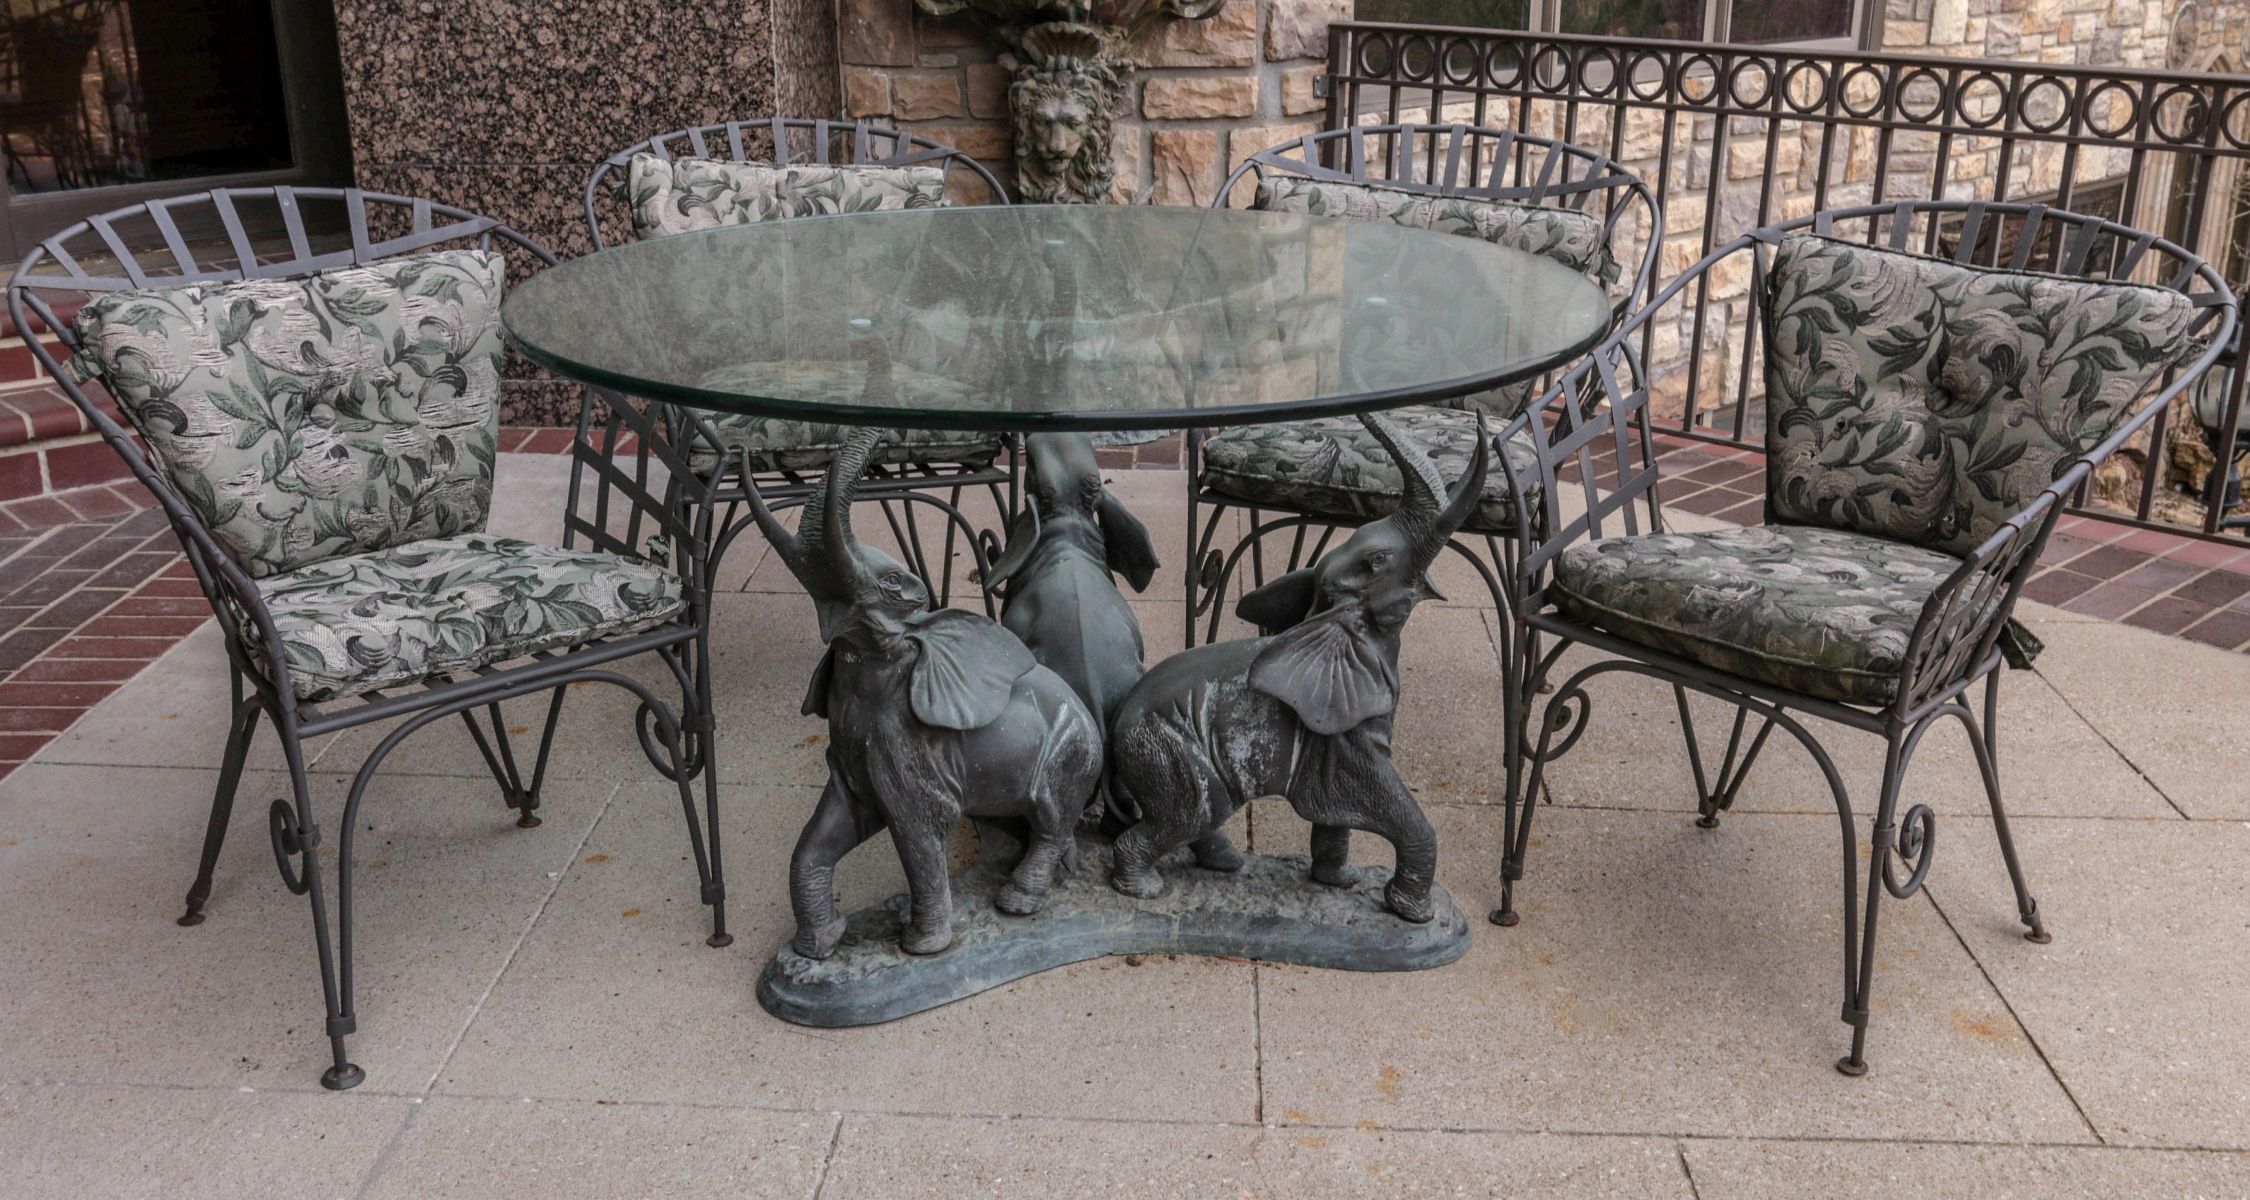 AN OUTDOOR DINING TABLE WITH BRONZE ELEPHANTS BASE